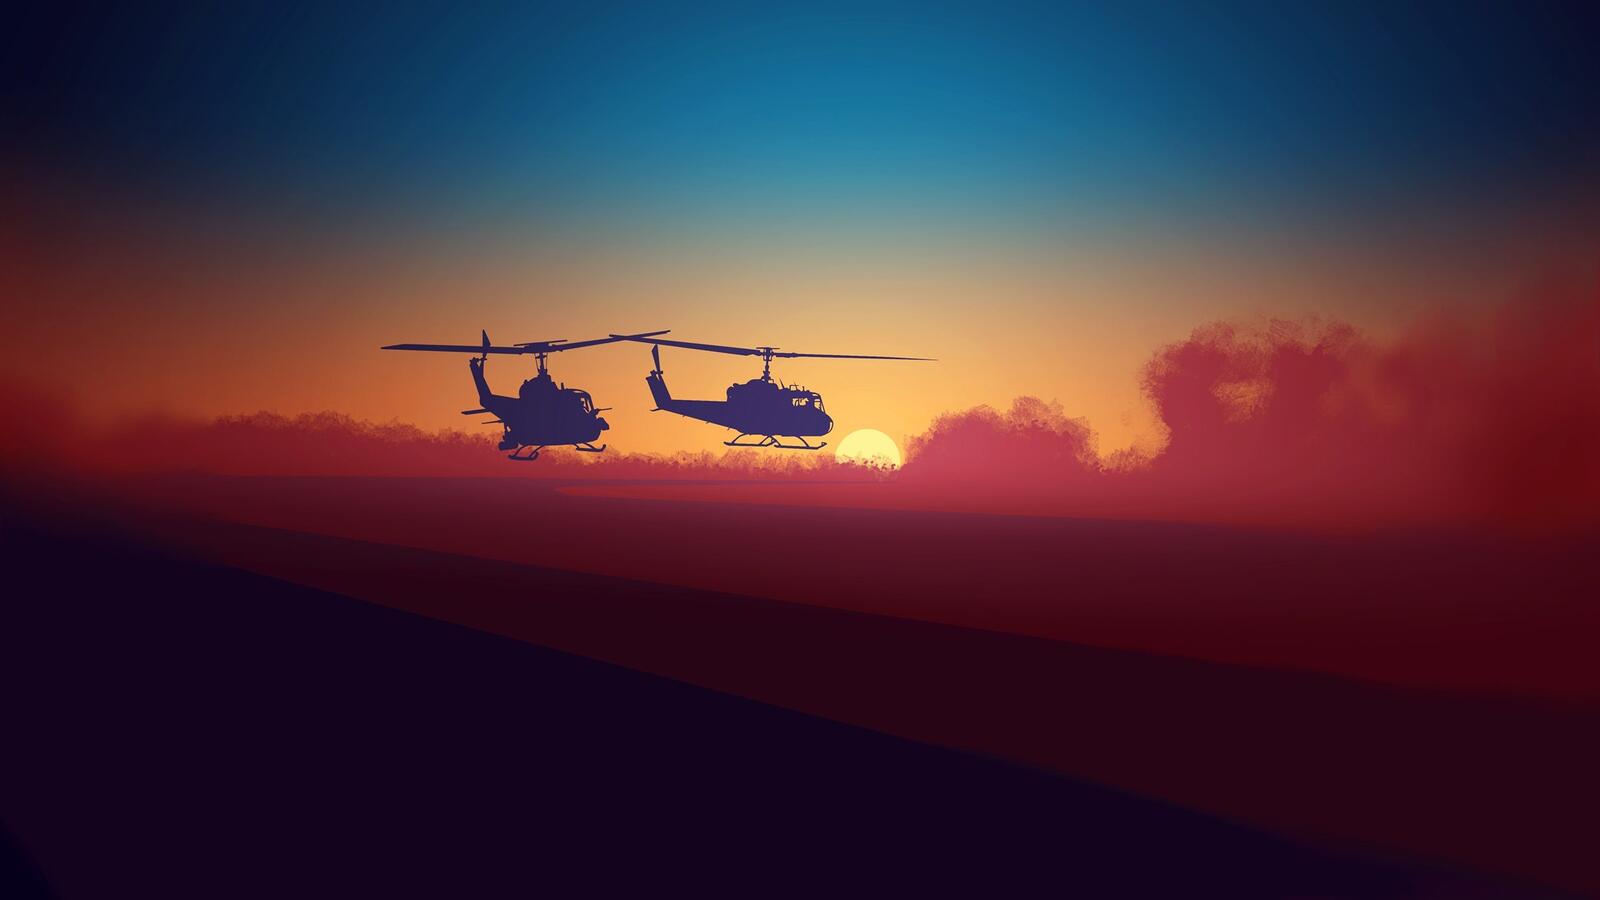 Wallpapers wallpaper helicopters silhouette sunset on the desktop